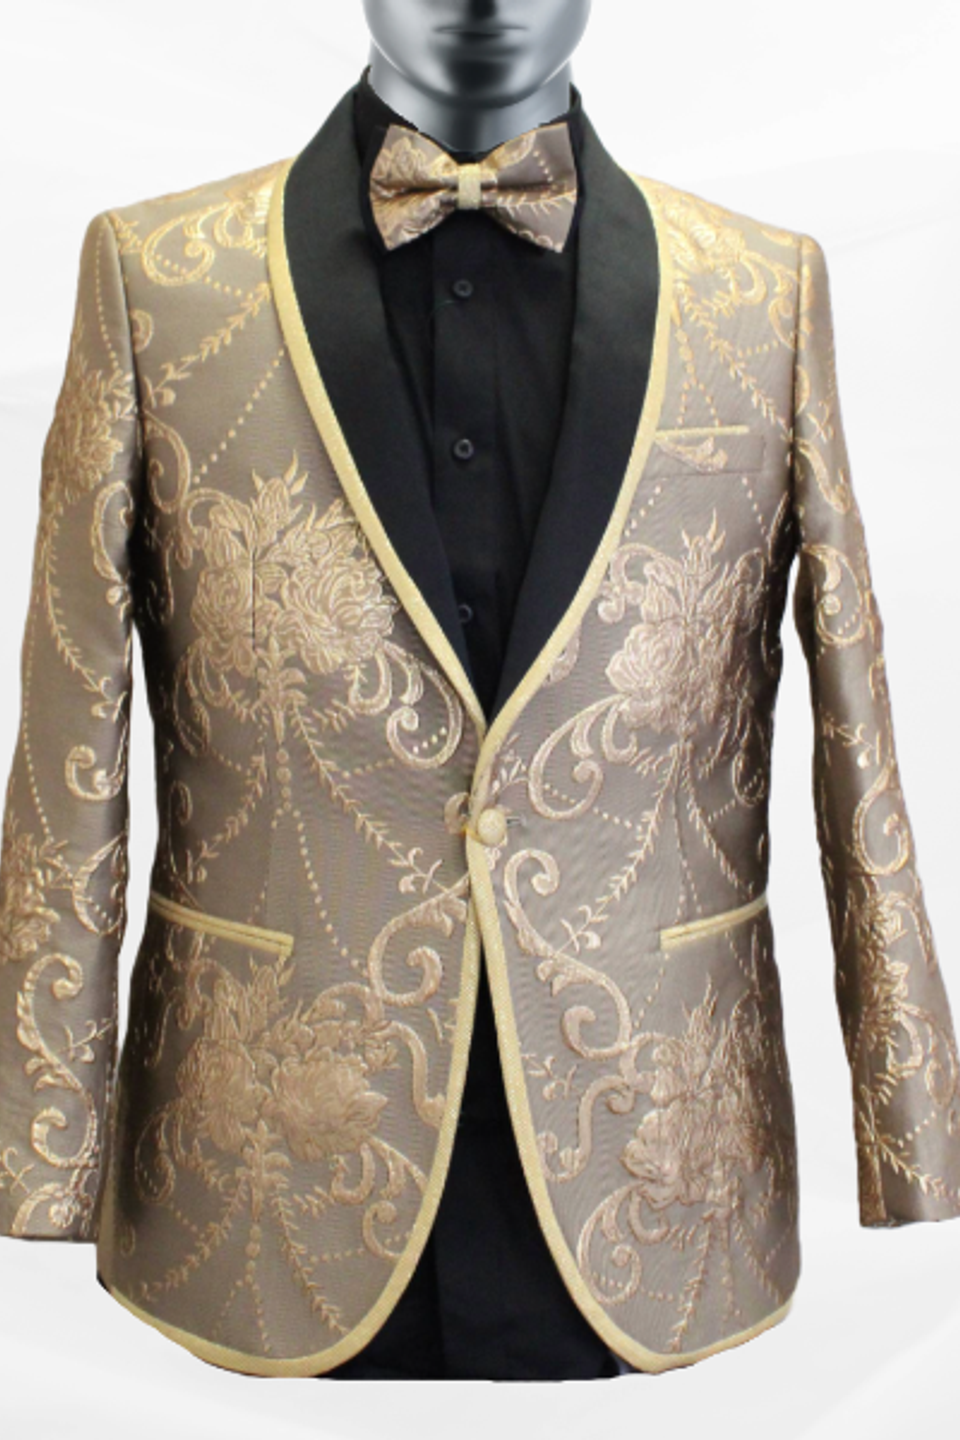 Gold jacket and bow tie